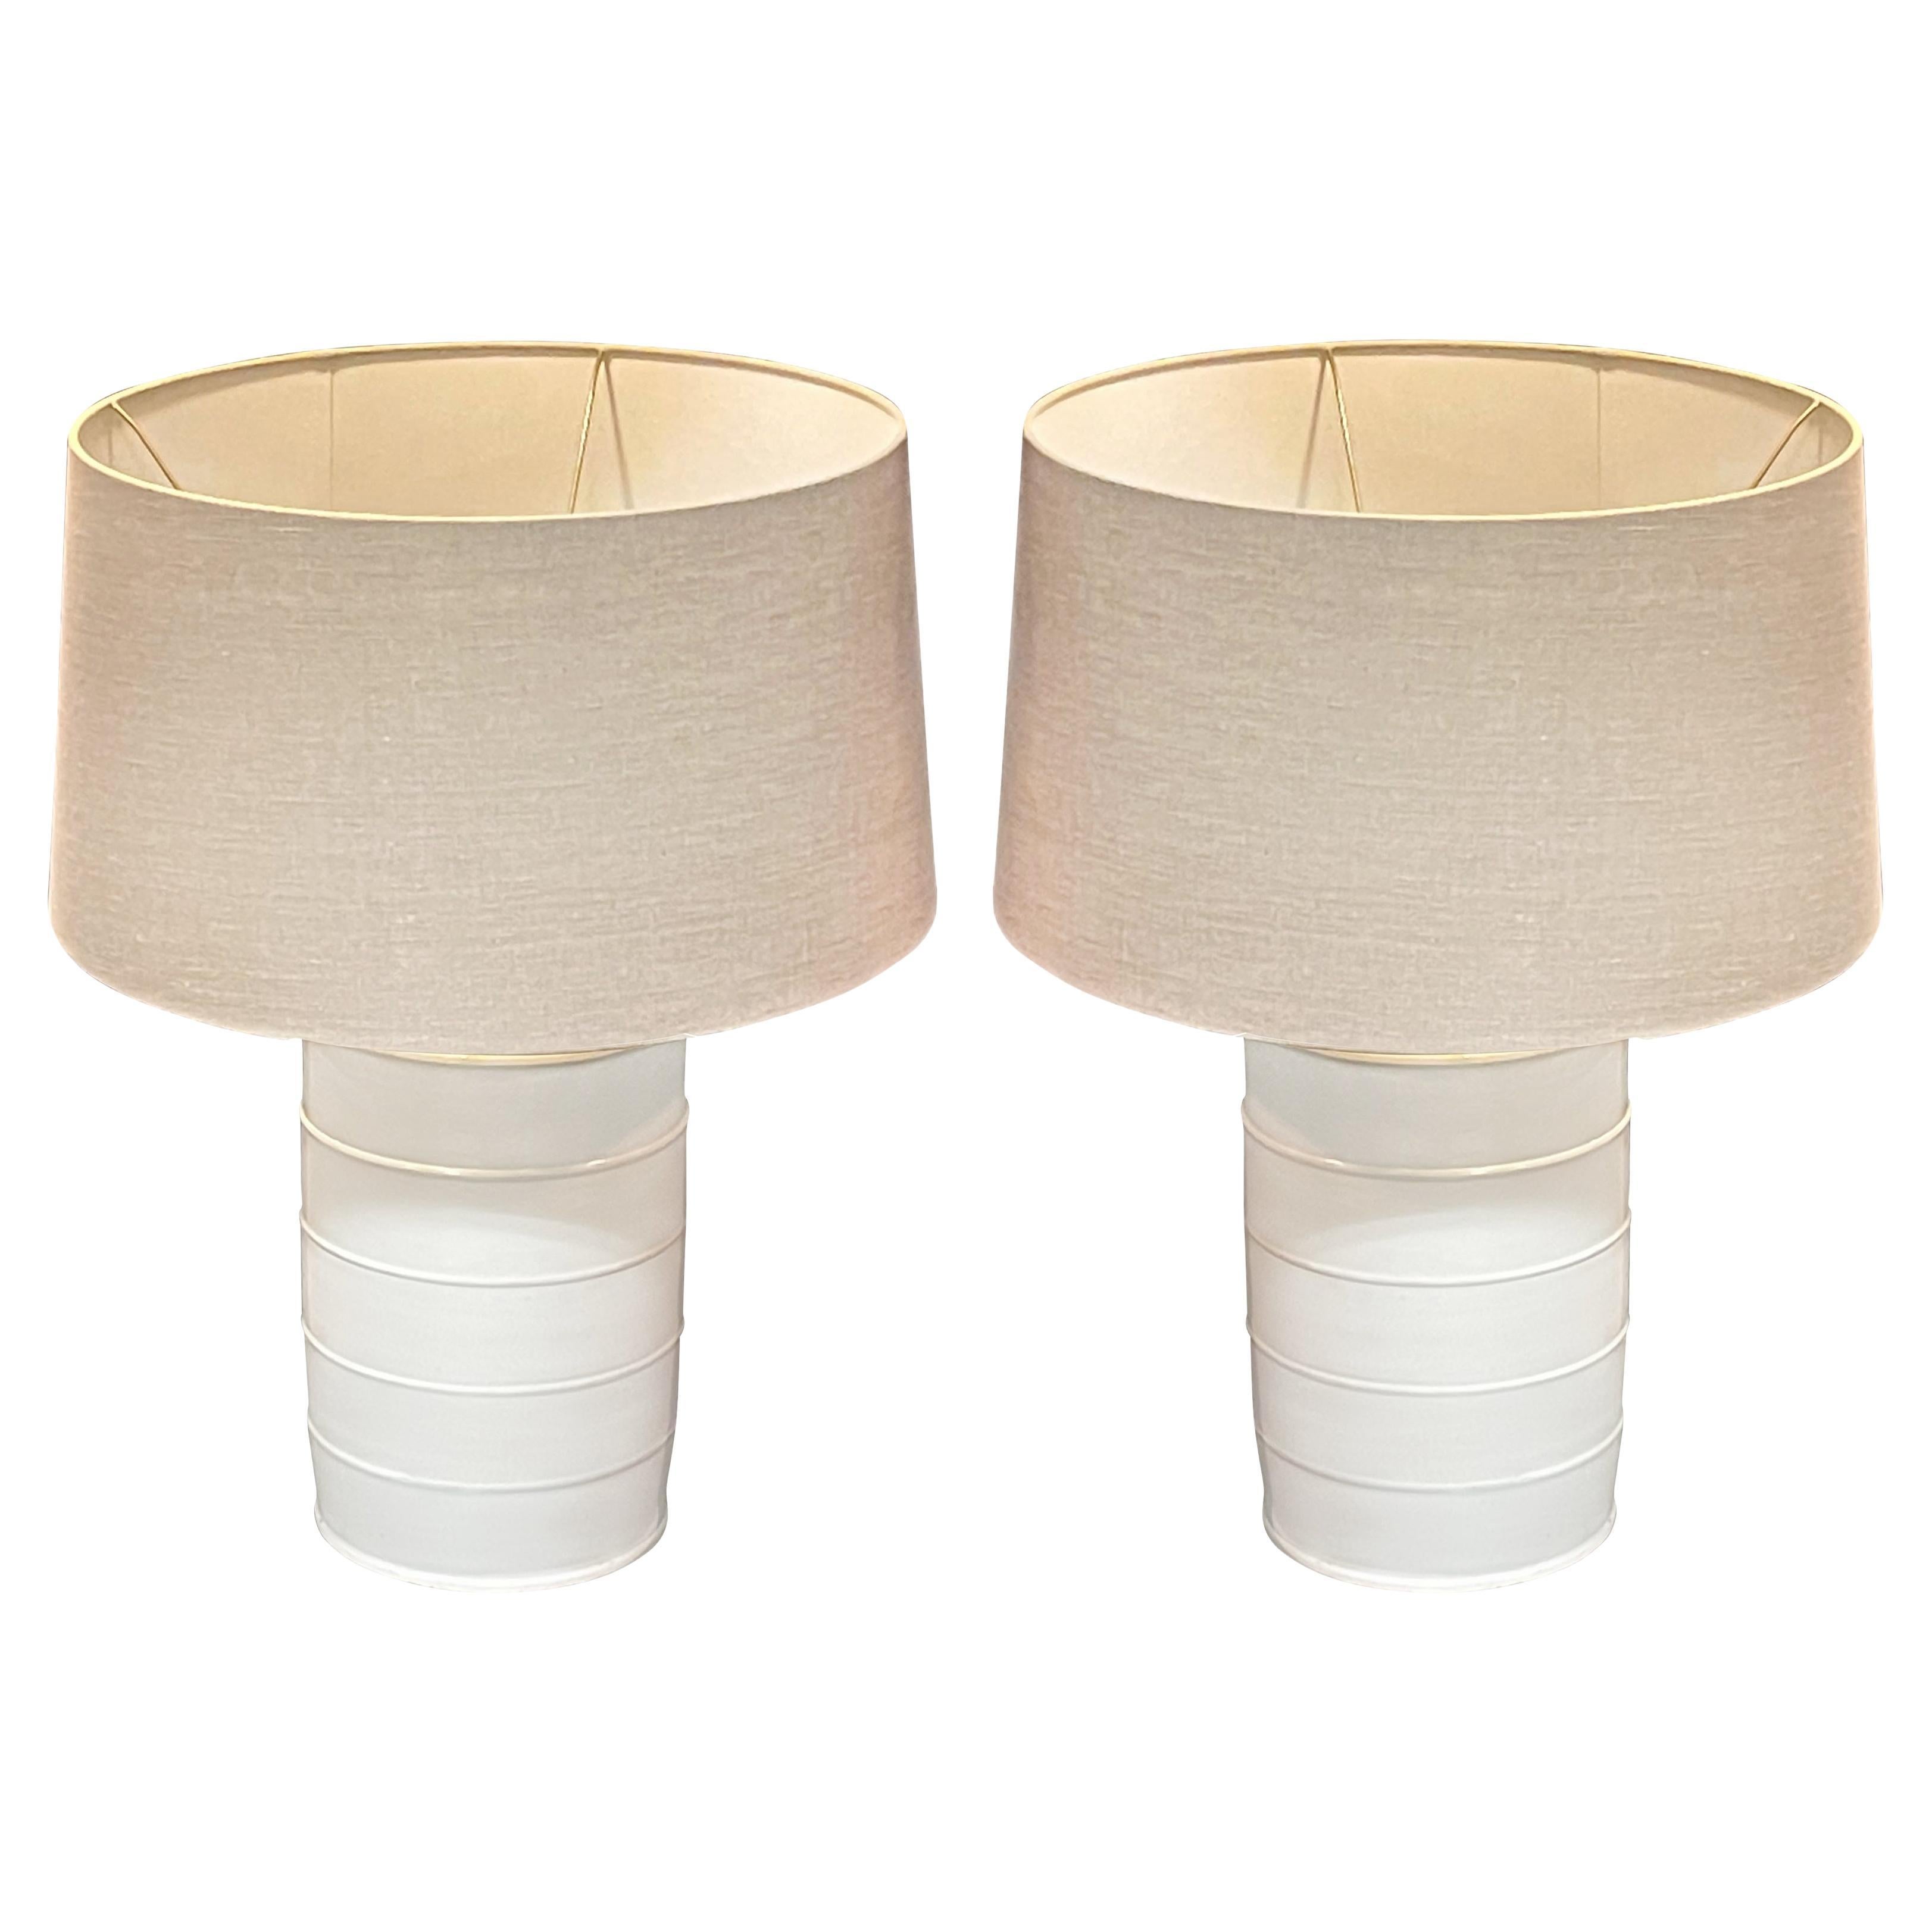 Cream Four Band Design Pair Canister Lamps, China, Contemporary